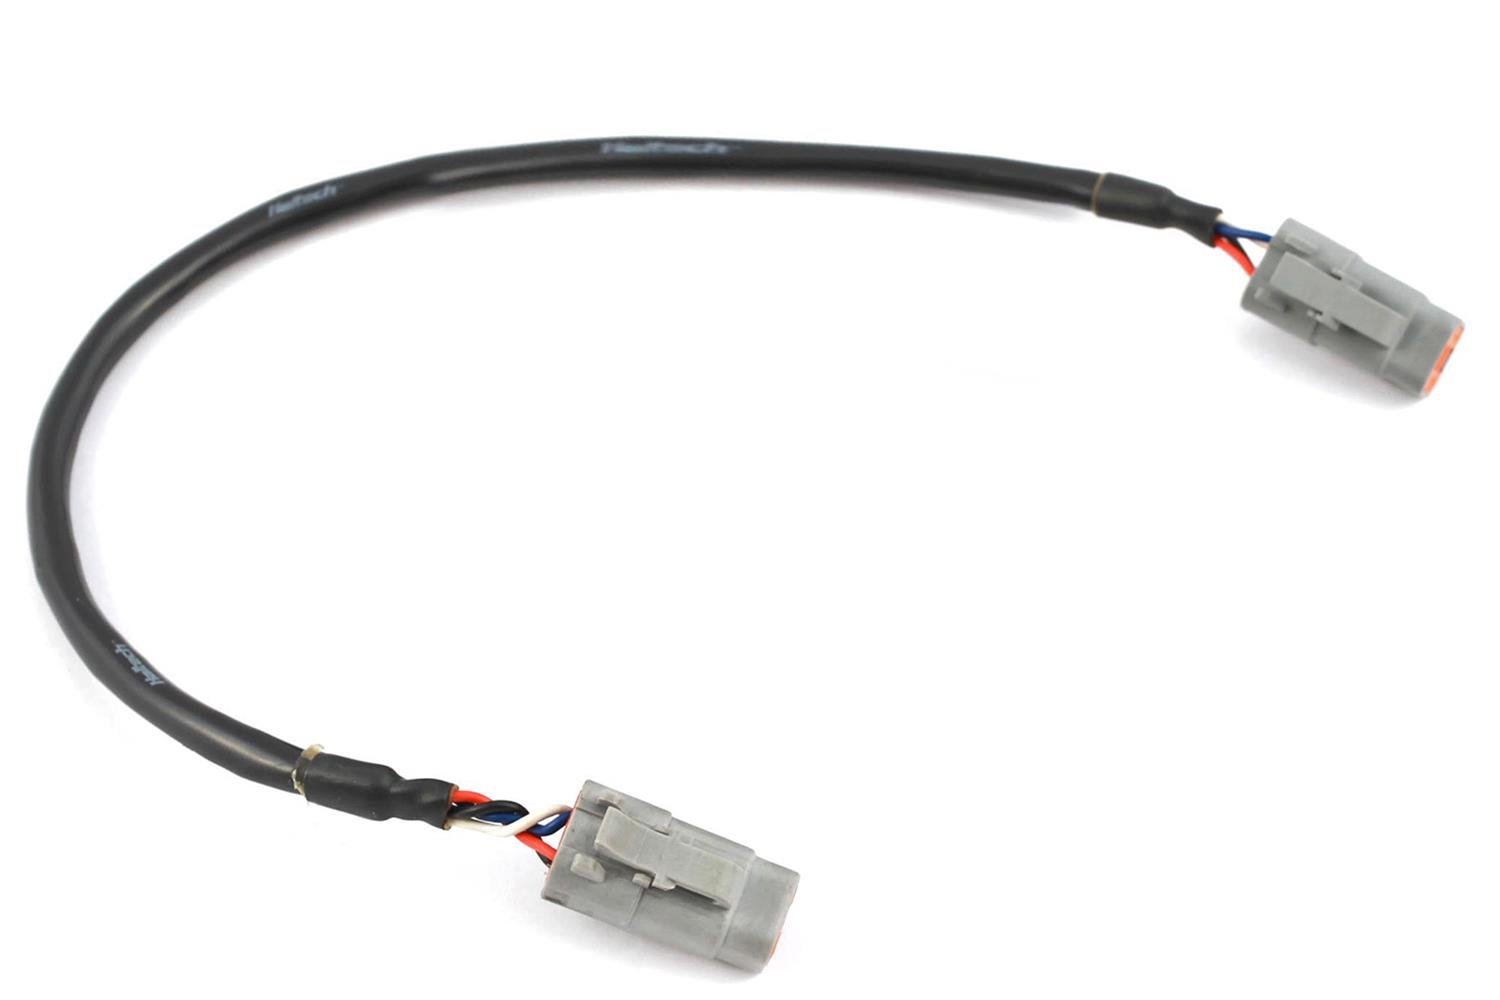 HT-130027 Elite CAN Cable, DTM-4 to DTM-4, 2400 mm (92 in.)